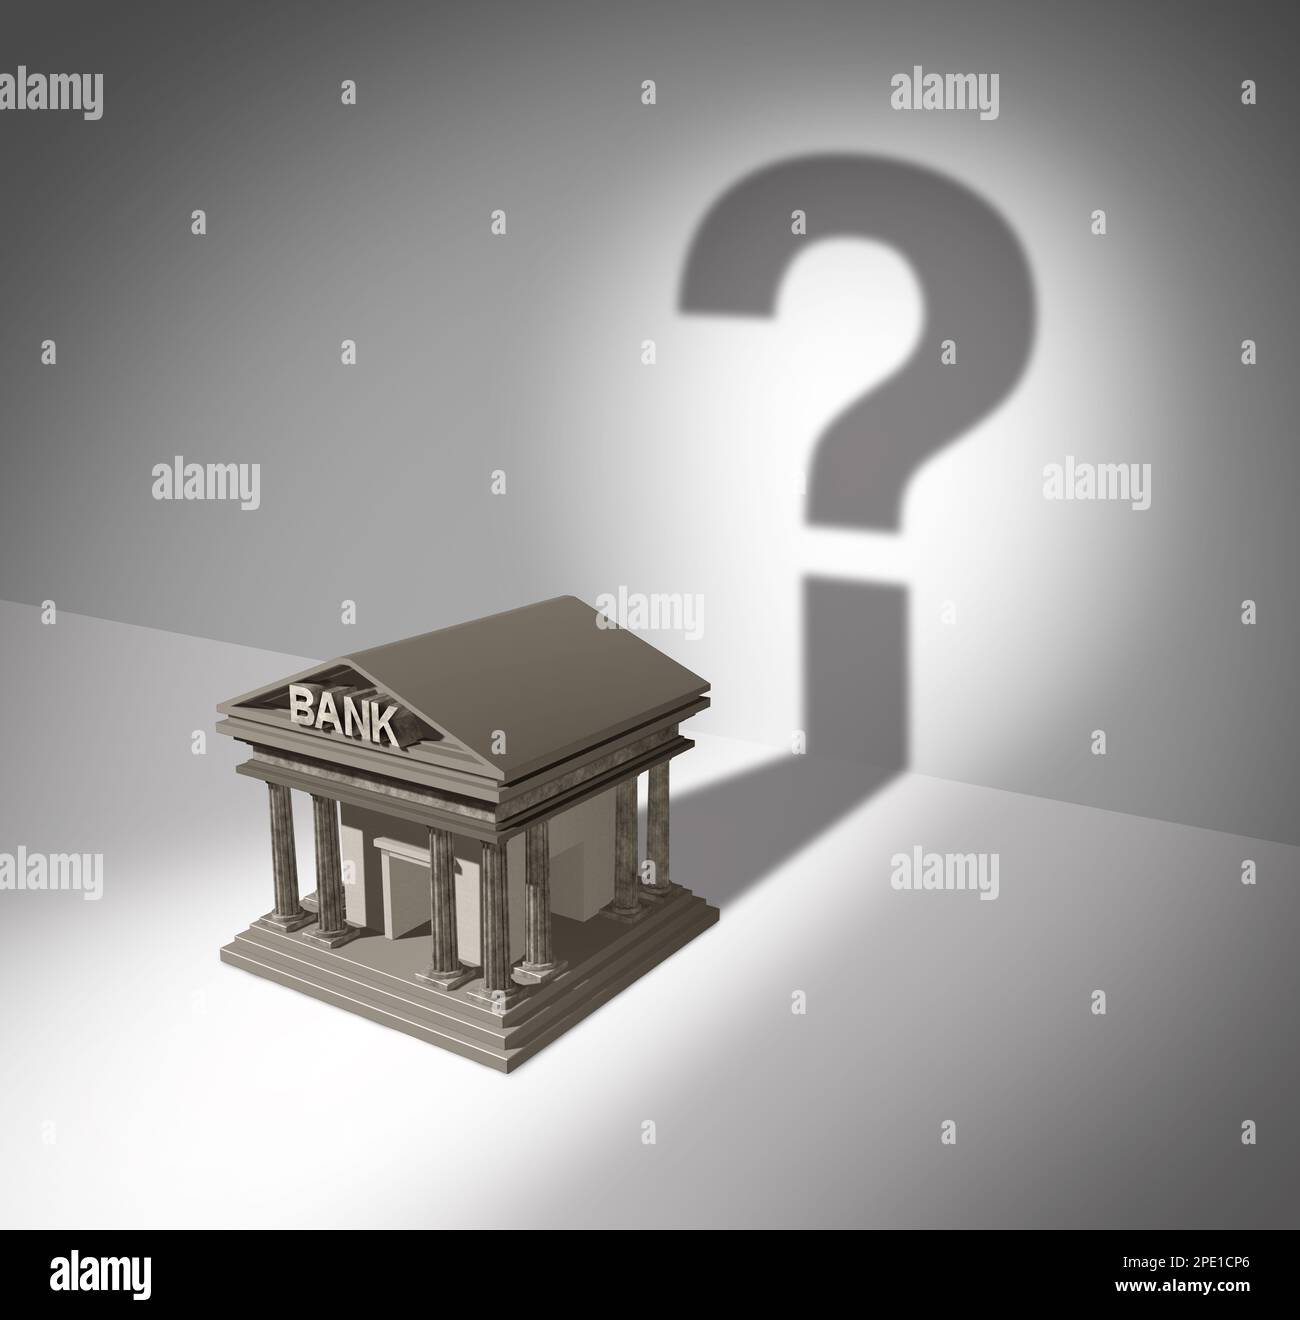 Banking System Uncertainty and Bank default questions or economic Crisis as Banks in debt with financial instability or insolvency concept Stock Photo